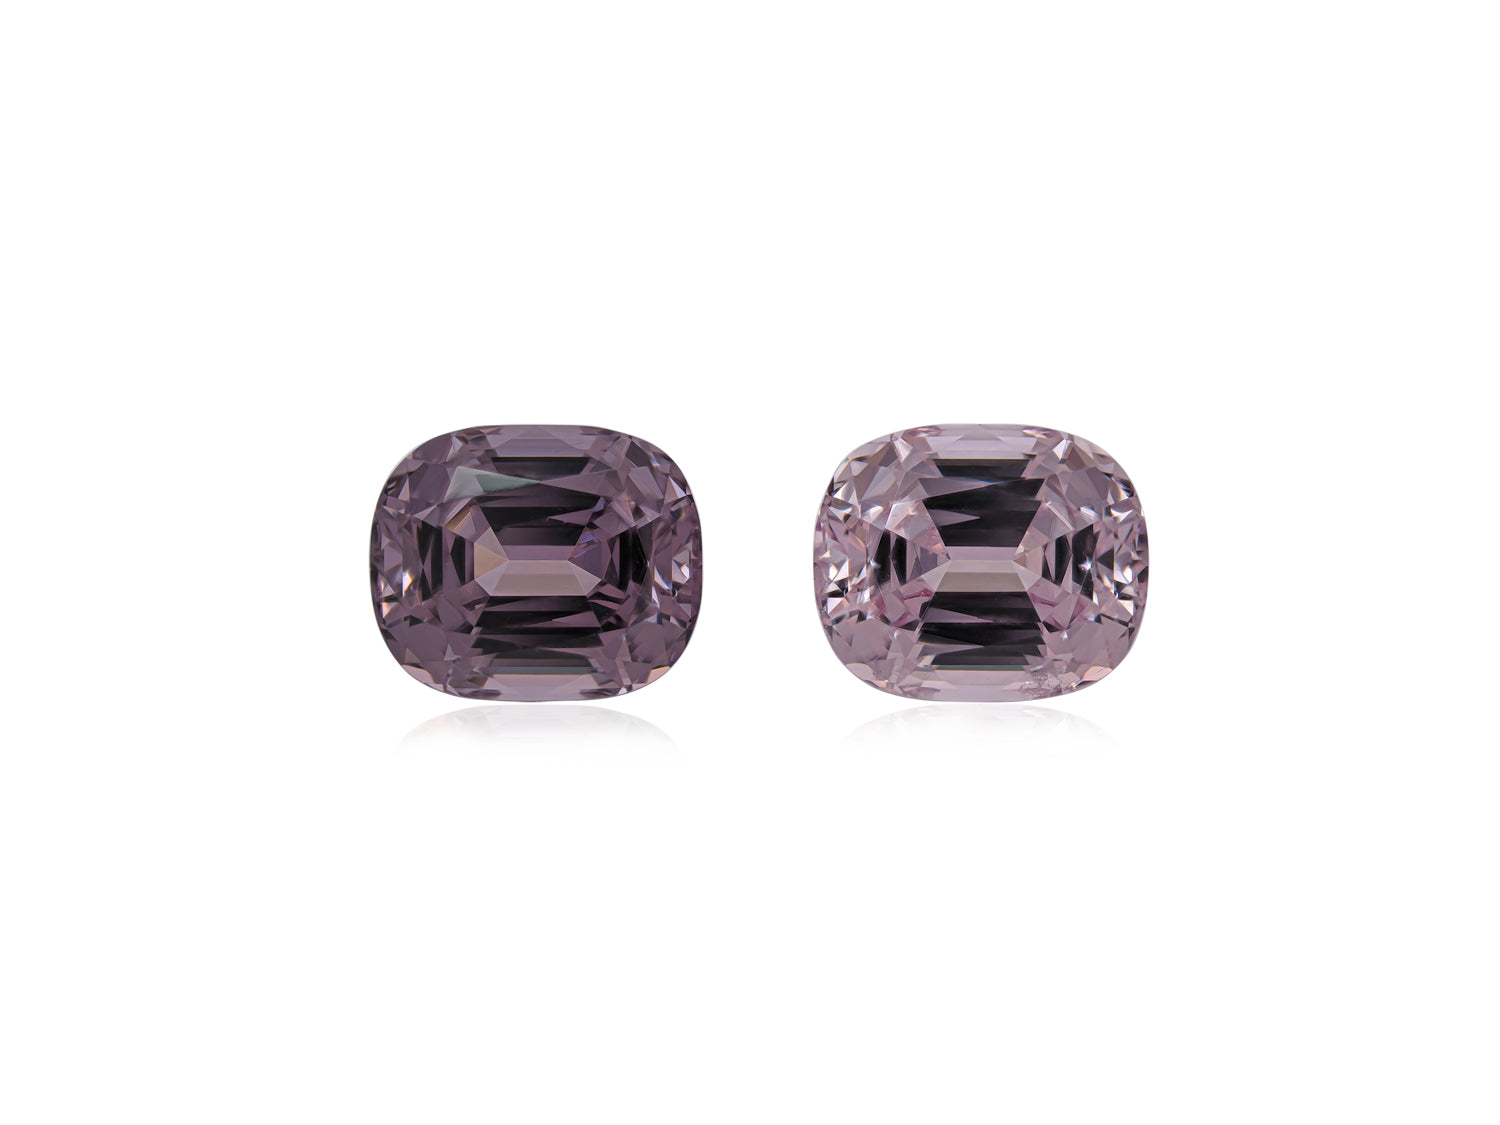 Spinel 5.55 CT / 2